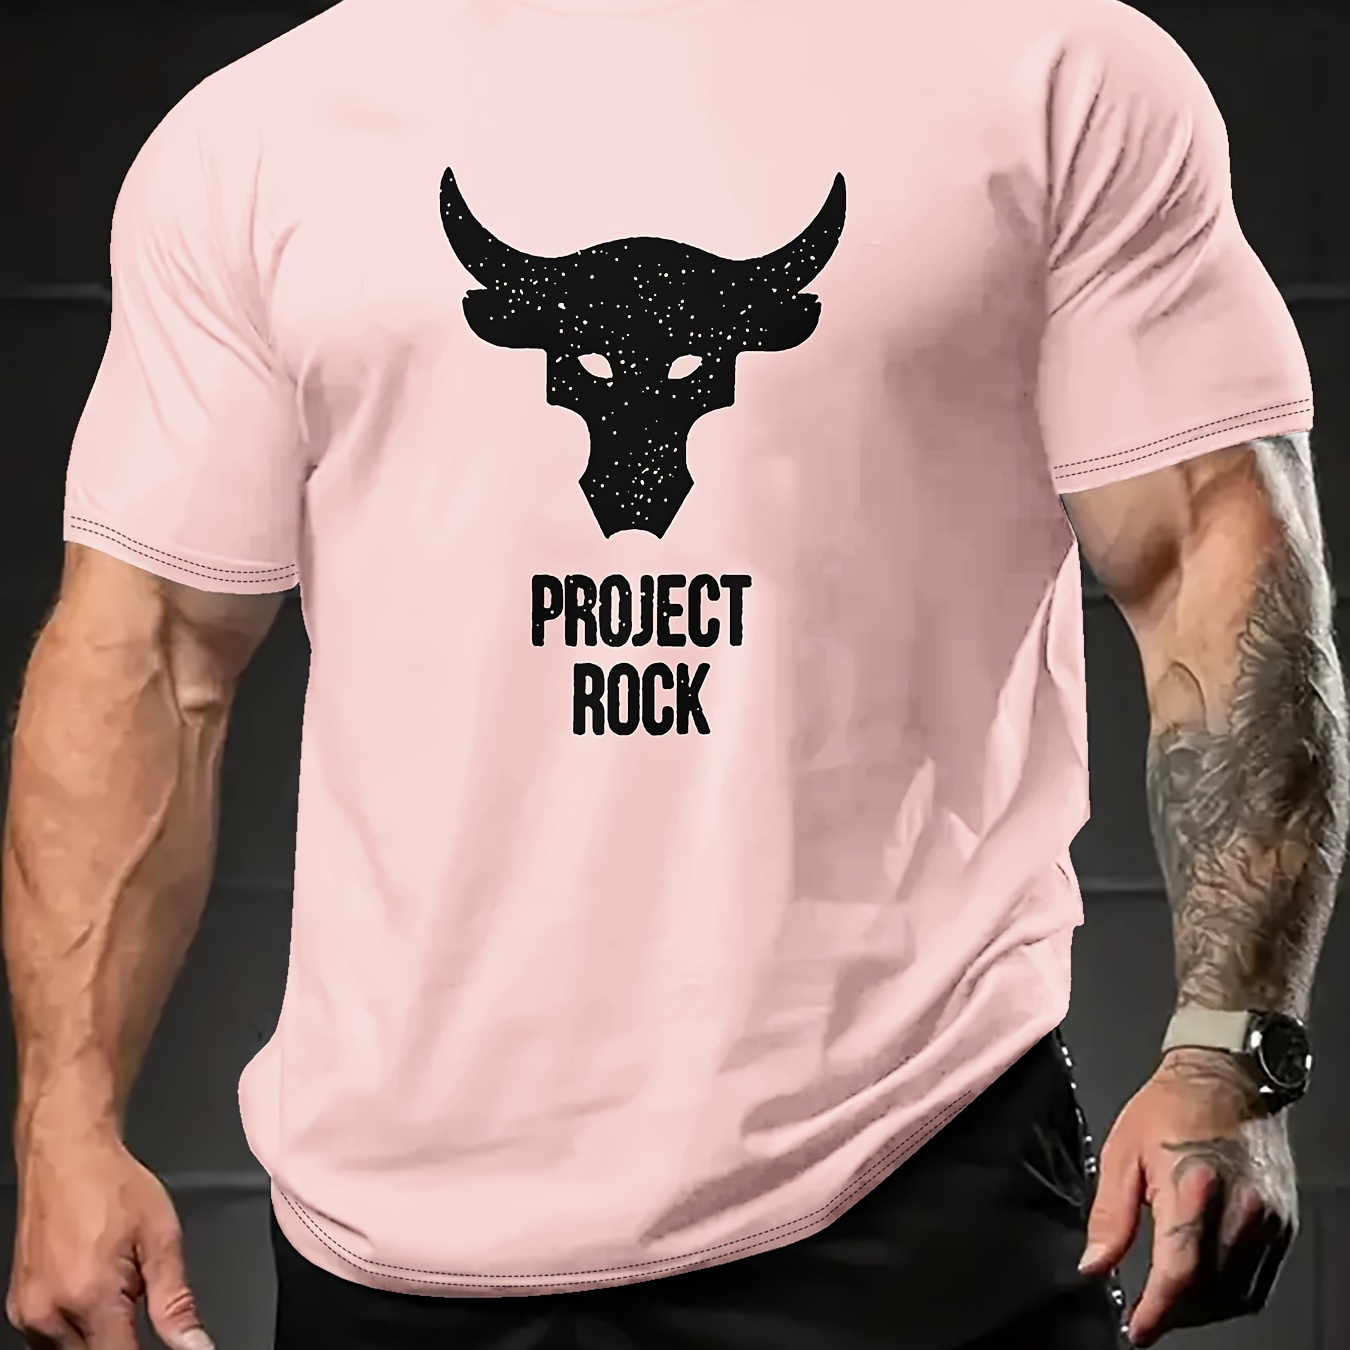 

Stylish Bull Head Print T-shirt, Men's Comfy Breathable Short Sleeve Tee, Men's Clothing For Summer Outdoors